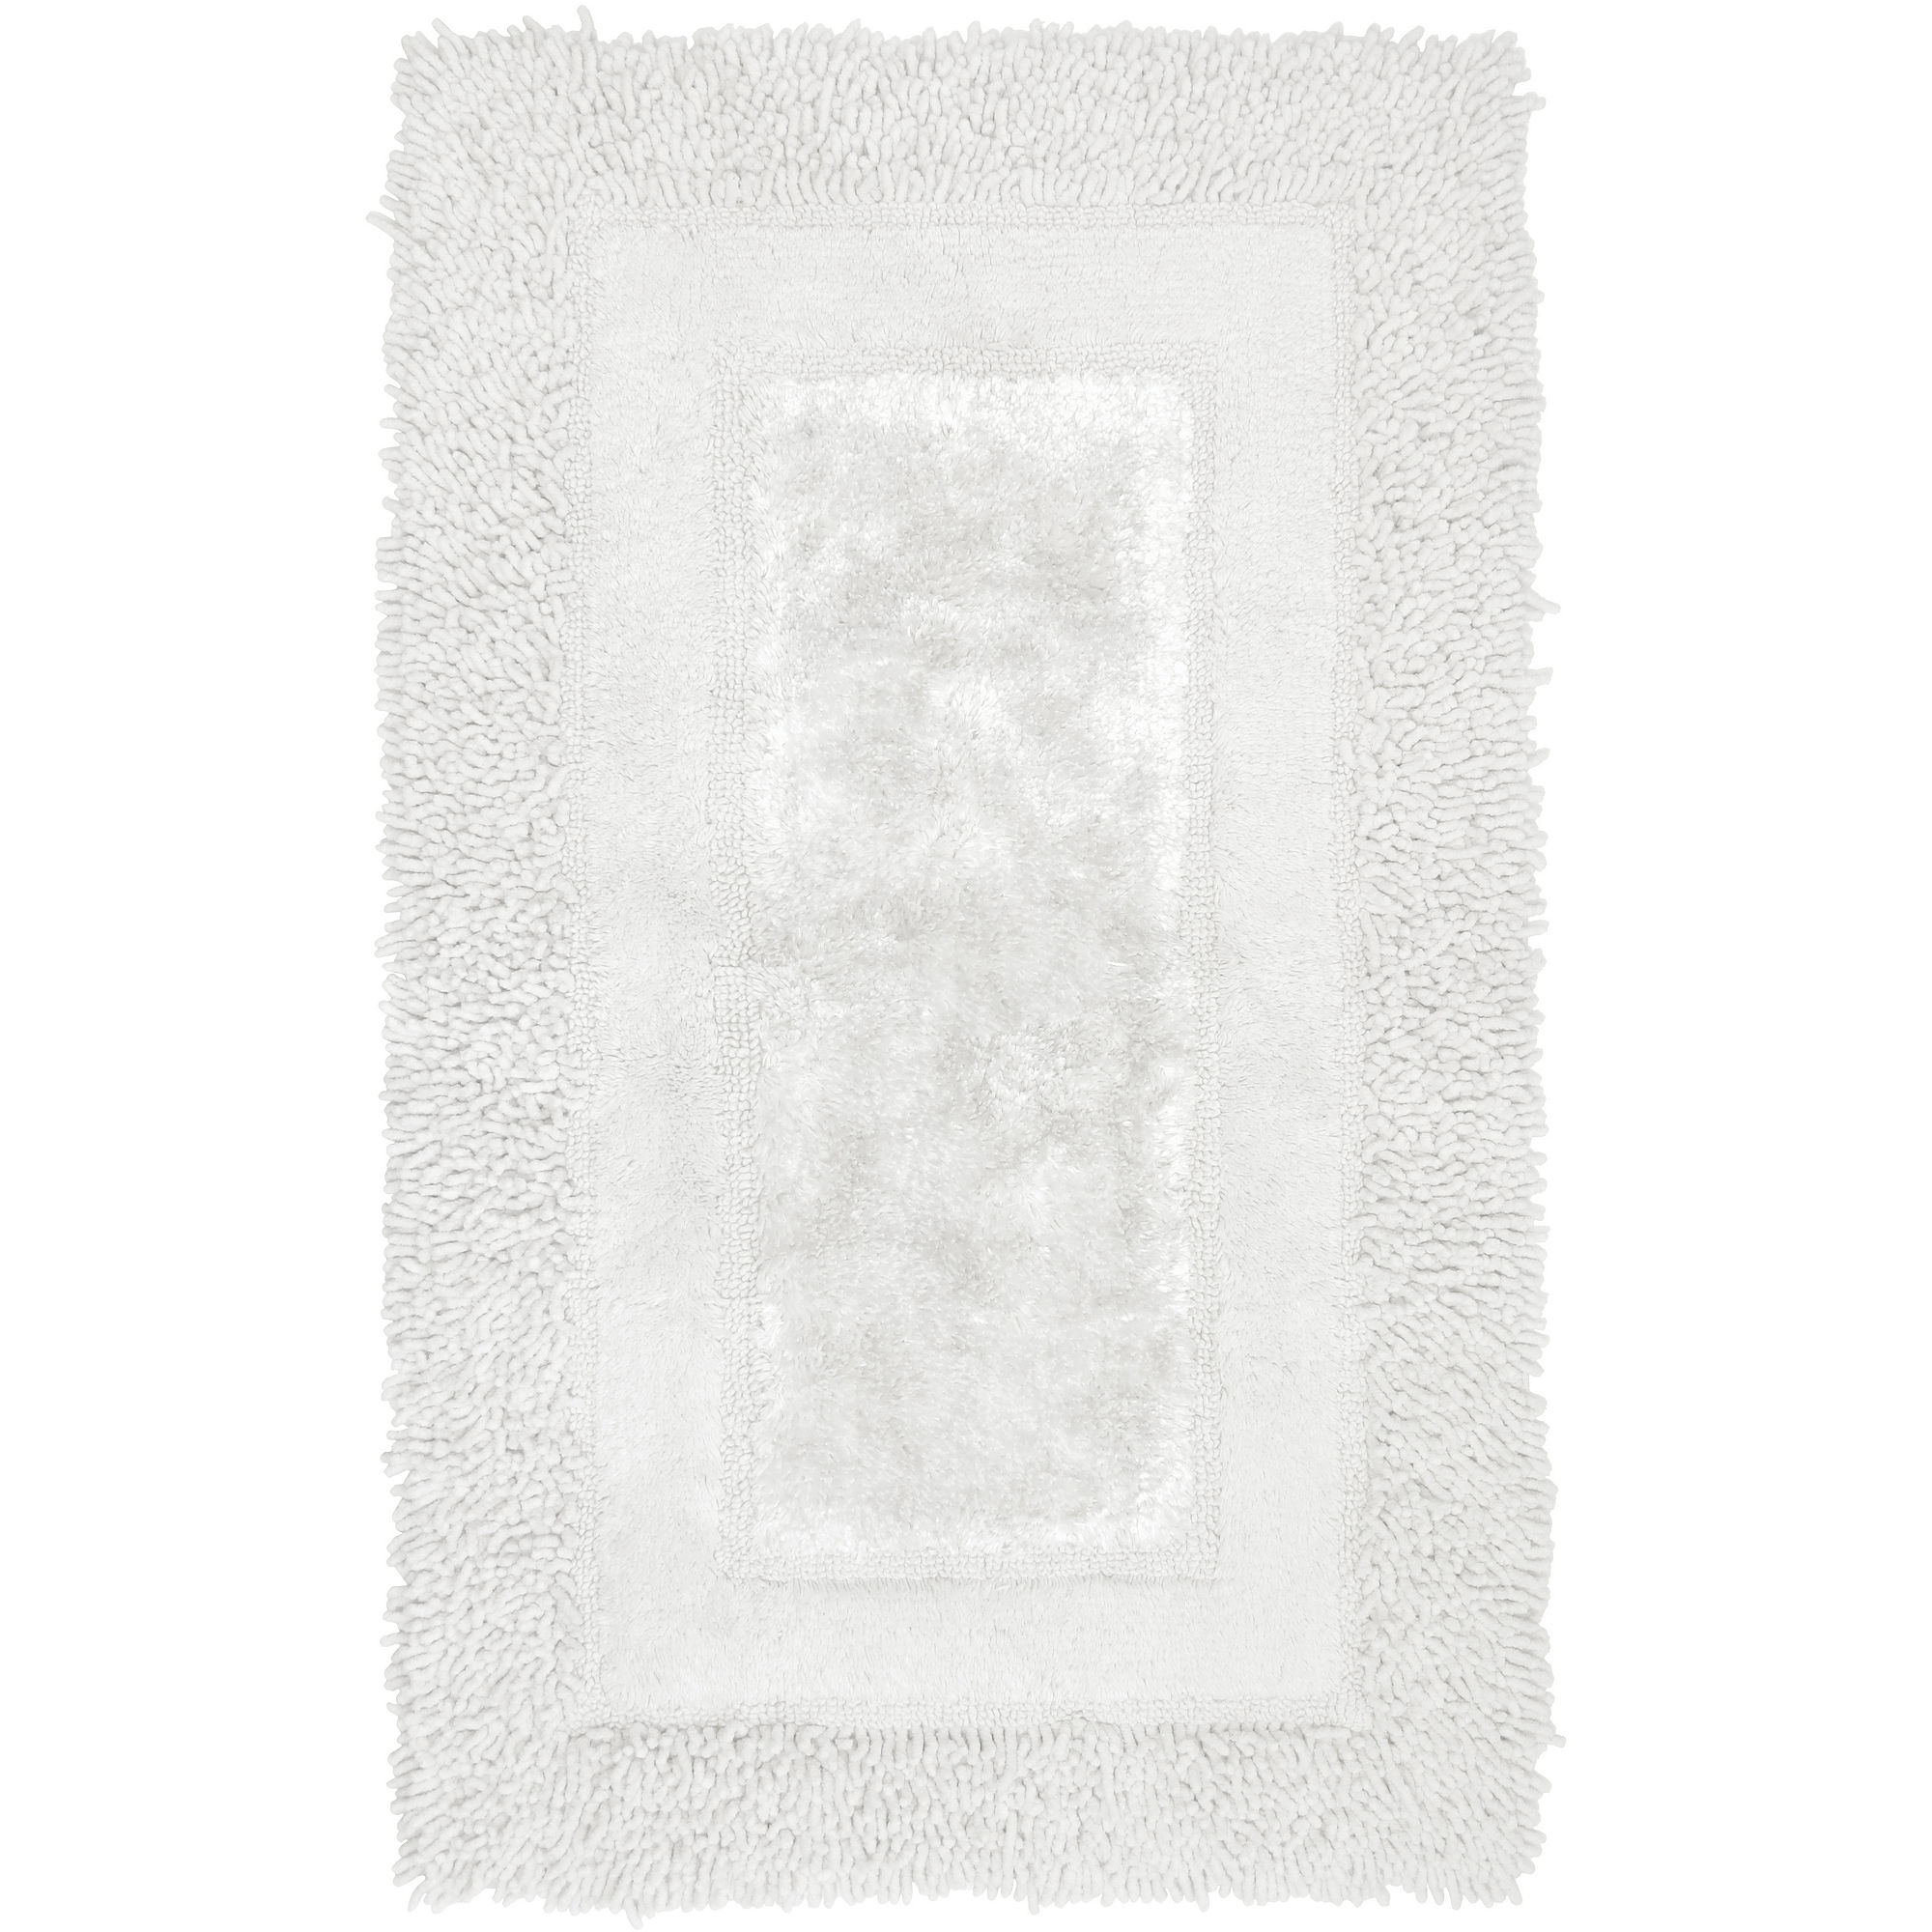 UPC 081675308417 product image for Park B. Smith Deluxe Border Bath Rug Collection | upcitemdb.com